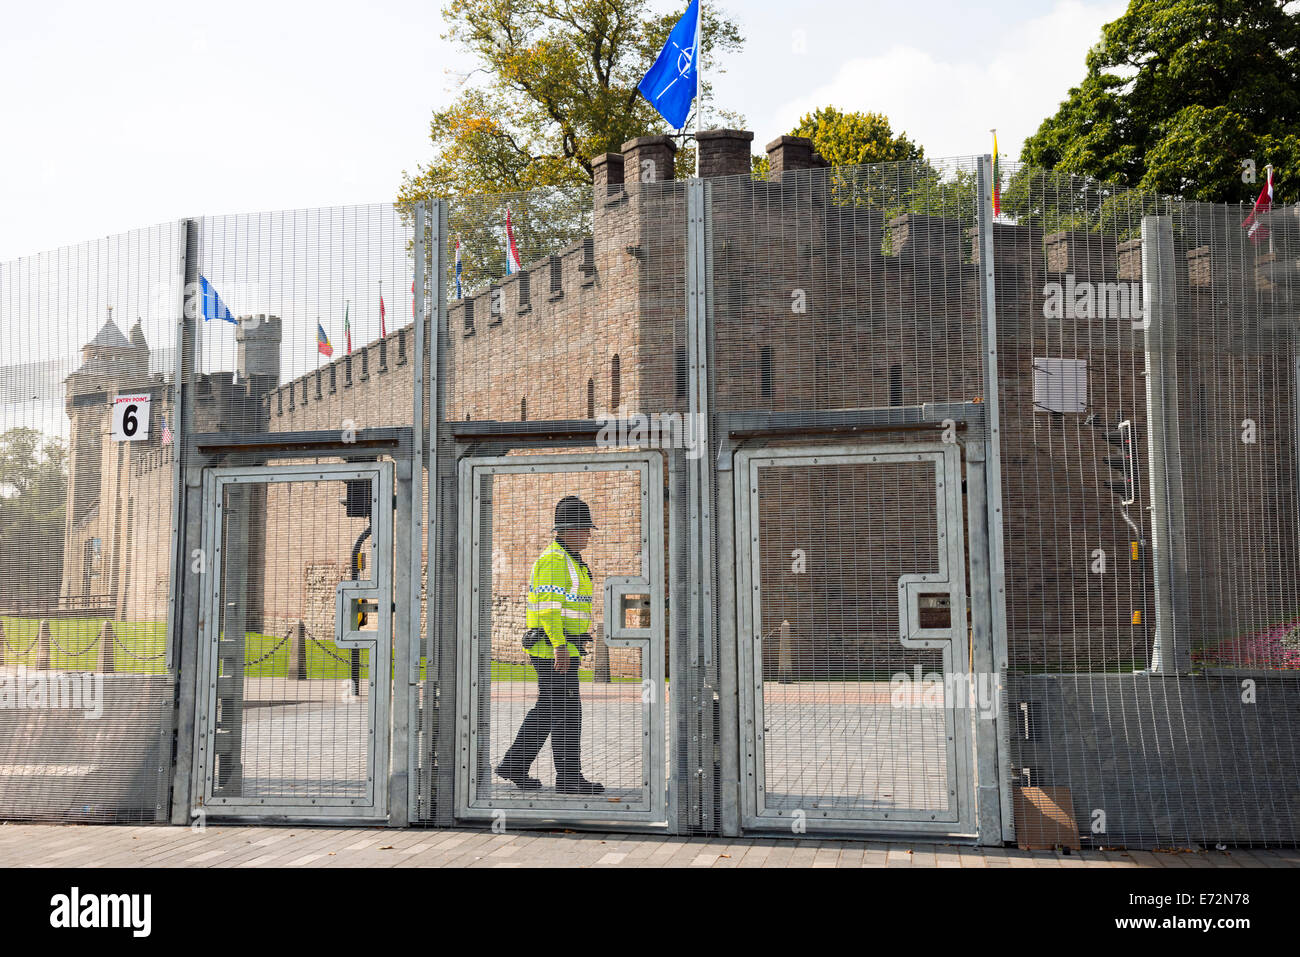 Cardiff, Wales, UK. 04th Sep, 2014. Nato security barrier in Cardiff City Centre, Wales, UK. Thursday 4th September 2014 Security fence around Cardiff Castle. Credit:  Robert Convery/Alamy Live News Stock Photo